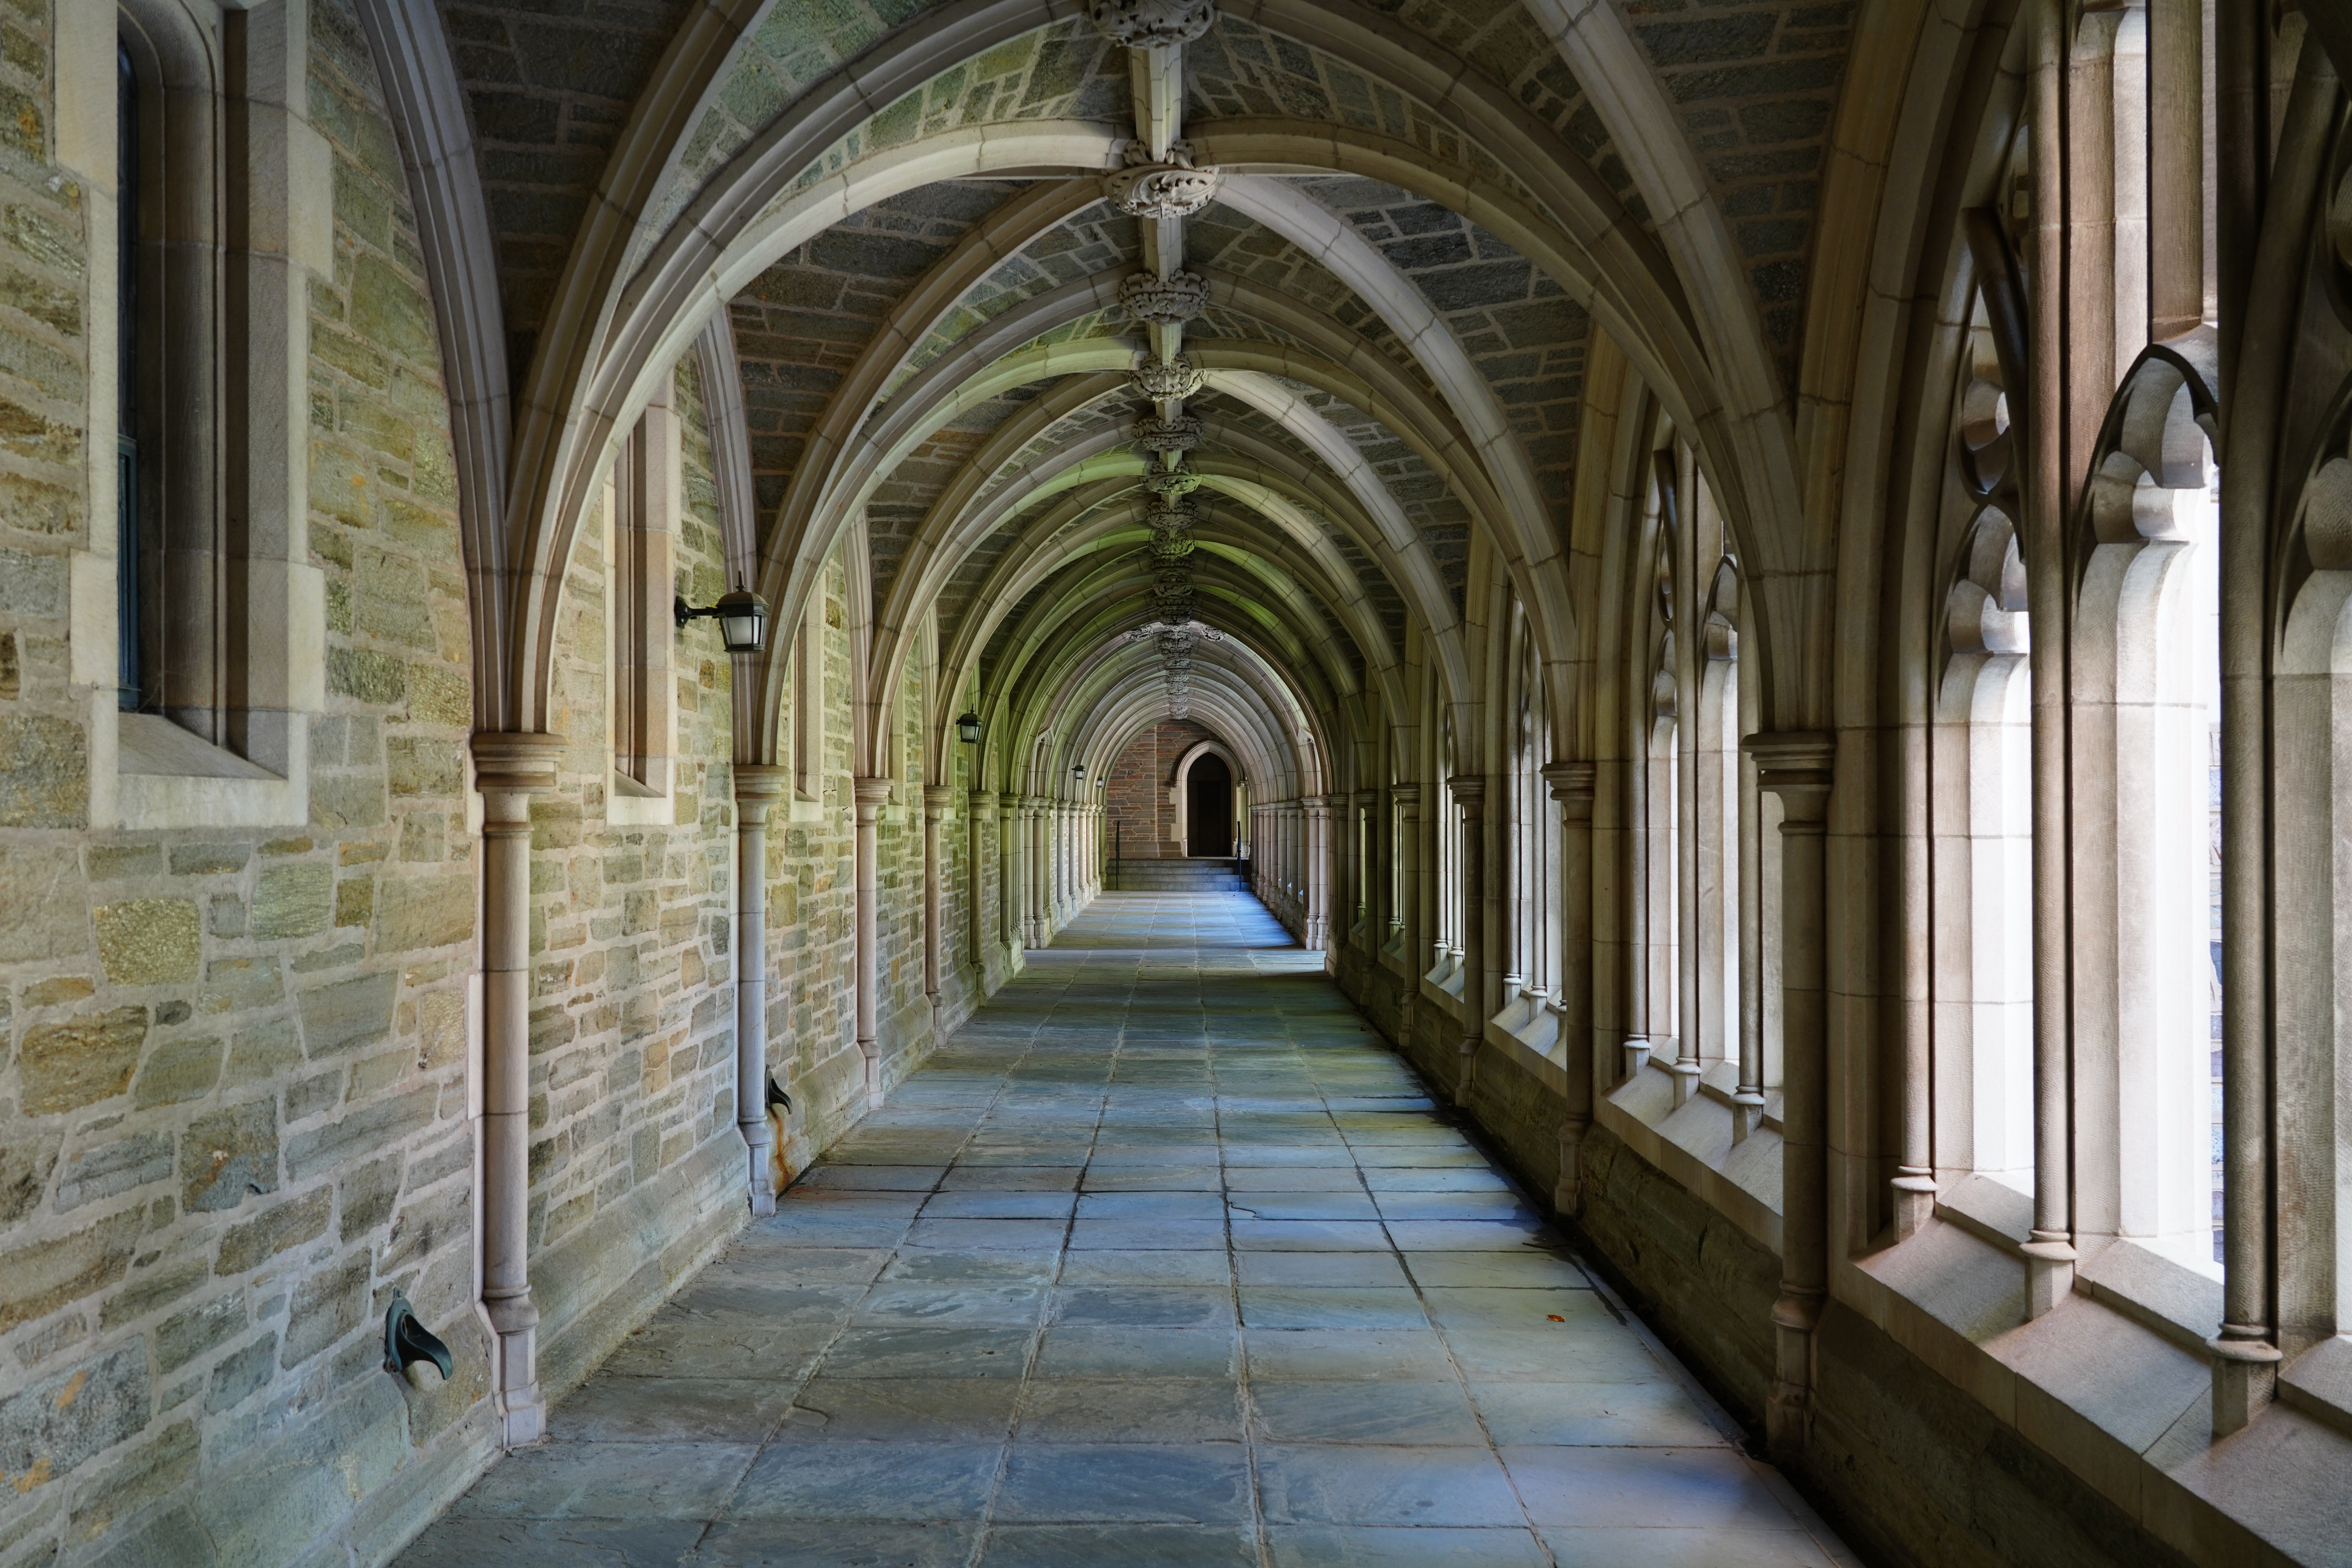 Featured in Oppenheimer Film Locations by Students Fare, this image shows View of gothic arches at Rockefeller College on the campus of Princeton University in New Jersey, United States.